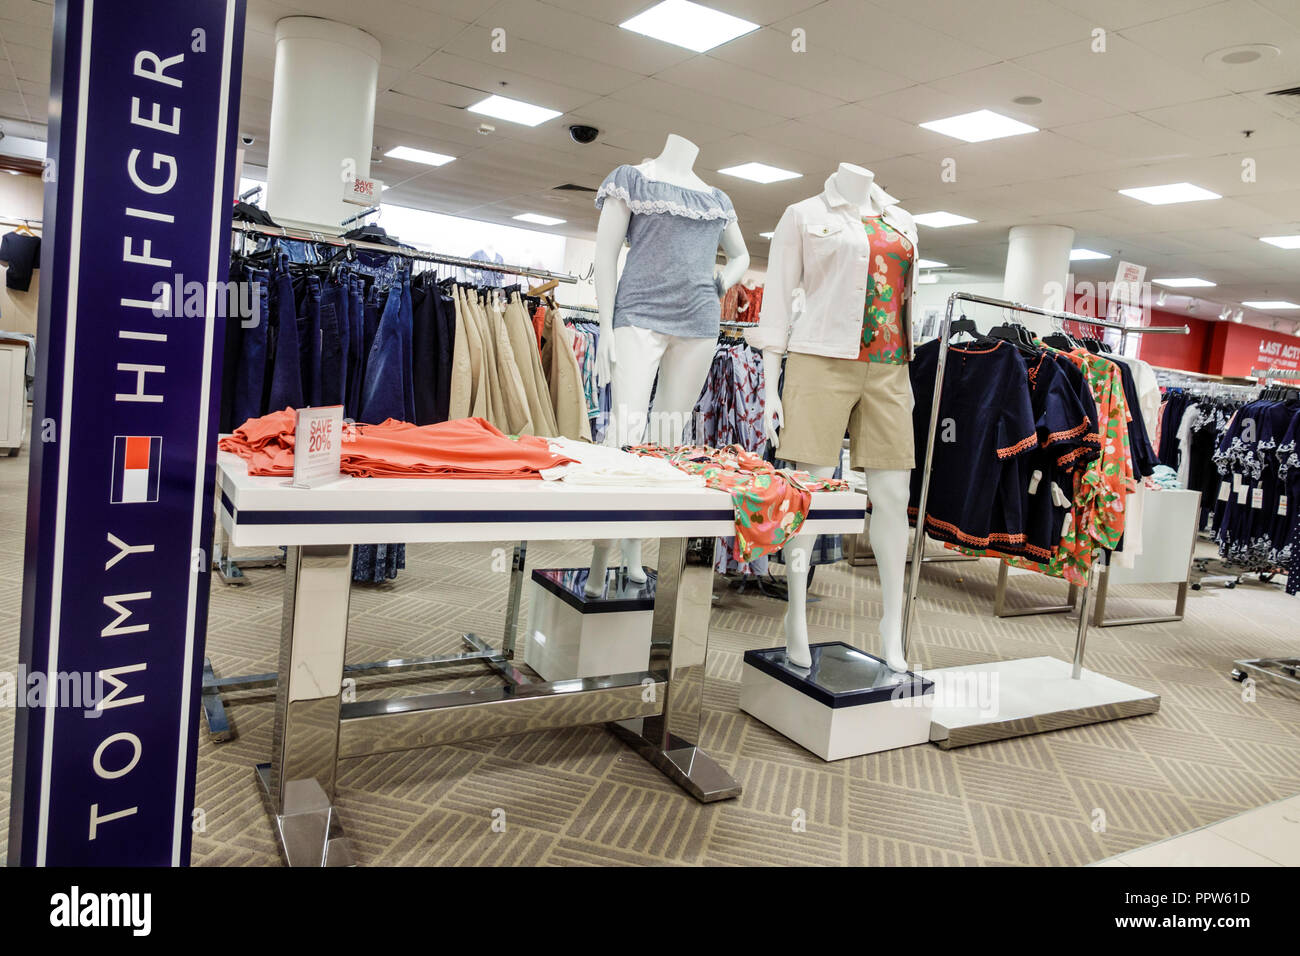 Tommy hilfiger clothing hi-res stock photography and images - Alamy